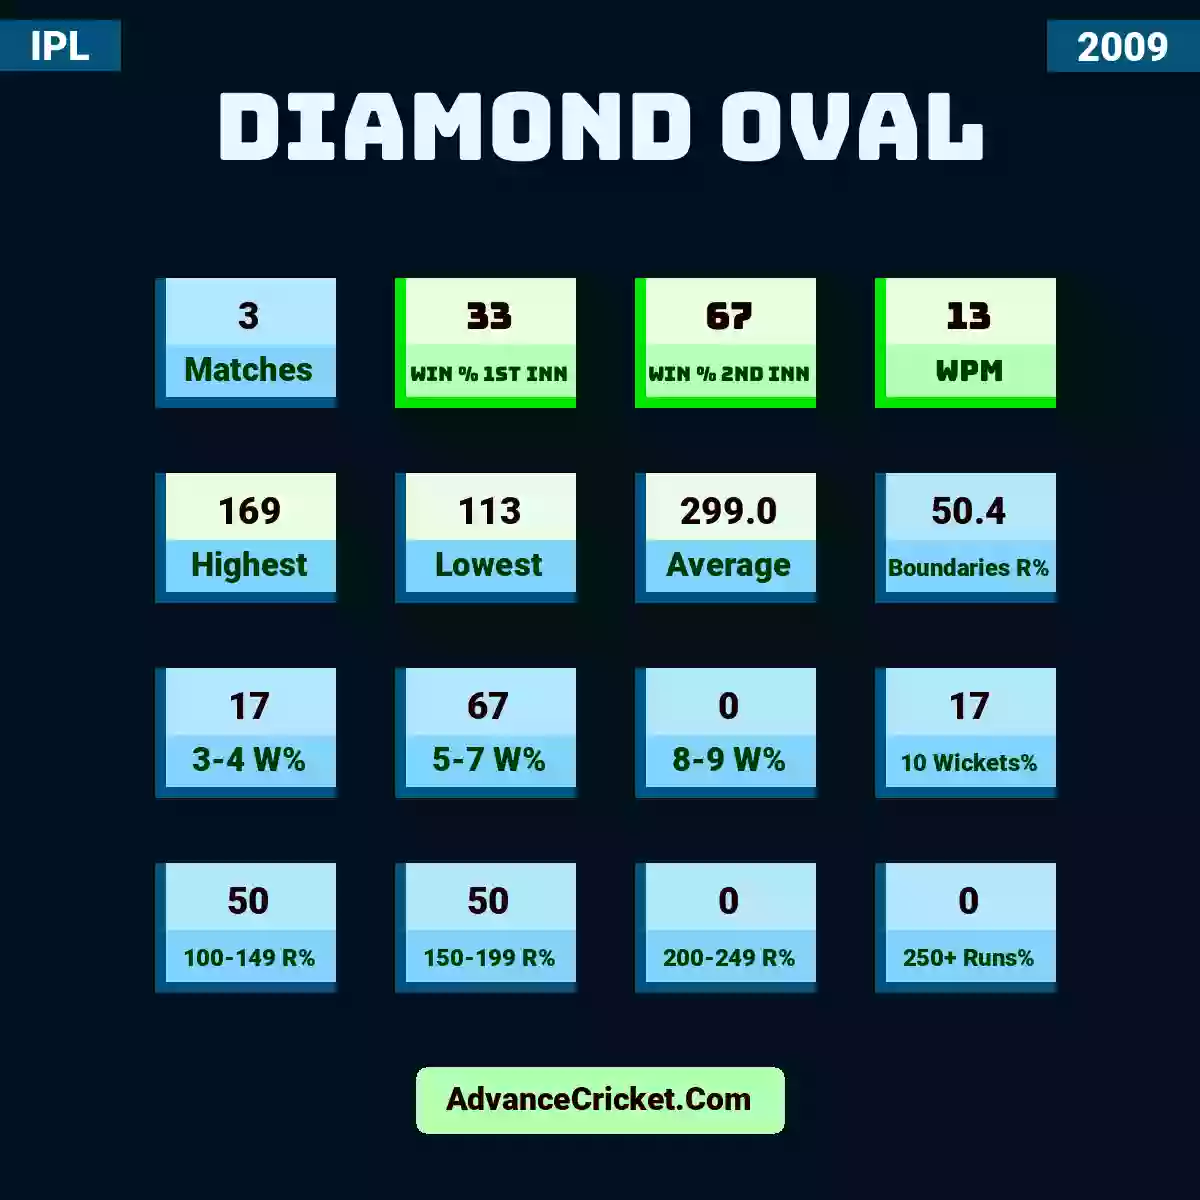 Image showing Diamond Oval with Matches: 3, Win % 1st Inn: 33, Win % 2nd Inn: 67, WPM: 13, Highest: 169, Lowest: 113, Average: 299.0, Boundaries R%: 50.4, 3-4 W%: 17, 5-7 W%: 67, 8-9 W%: 0, 10 Wickets%: 17, 100-149 R%: 50, 150-199 R%: 50, 200-249 R%: 0, 250+ Runs%: 0.